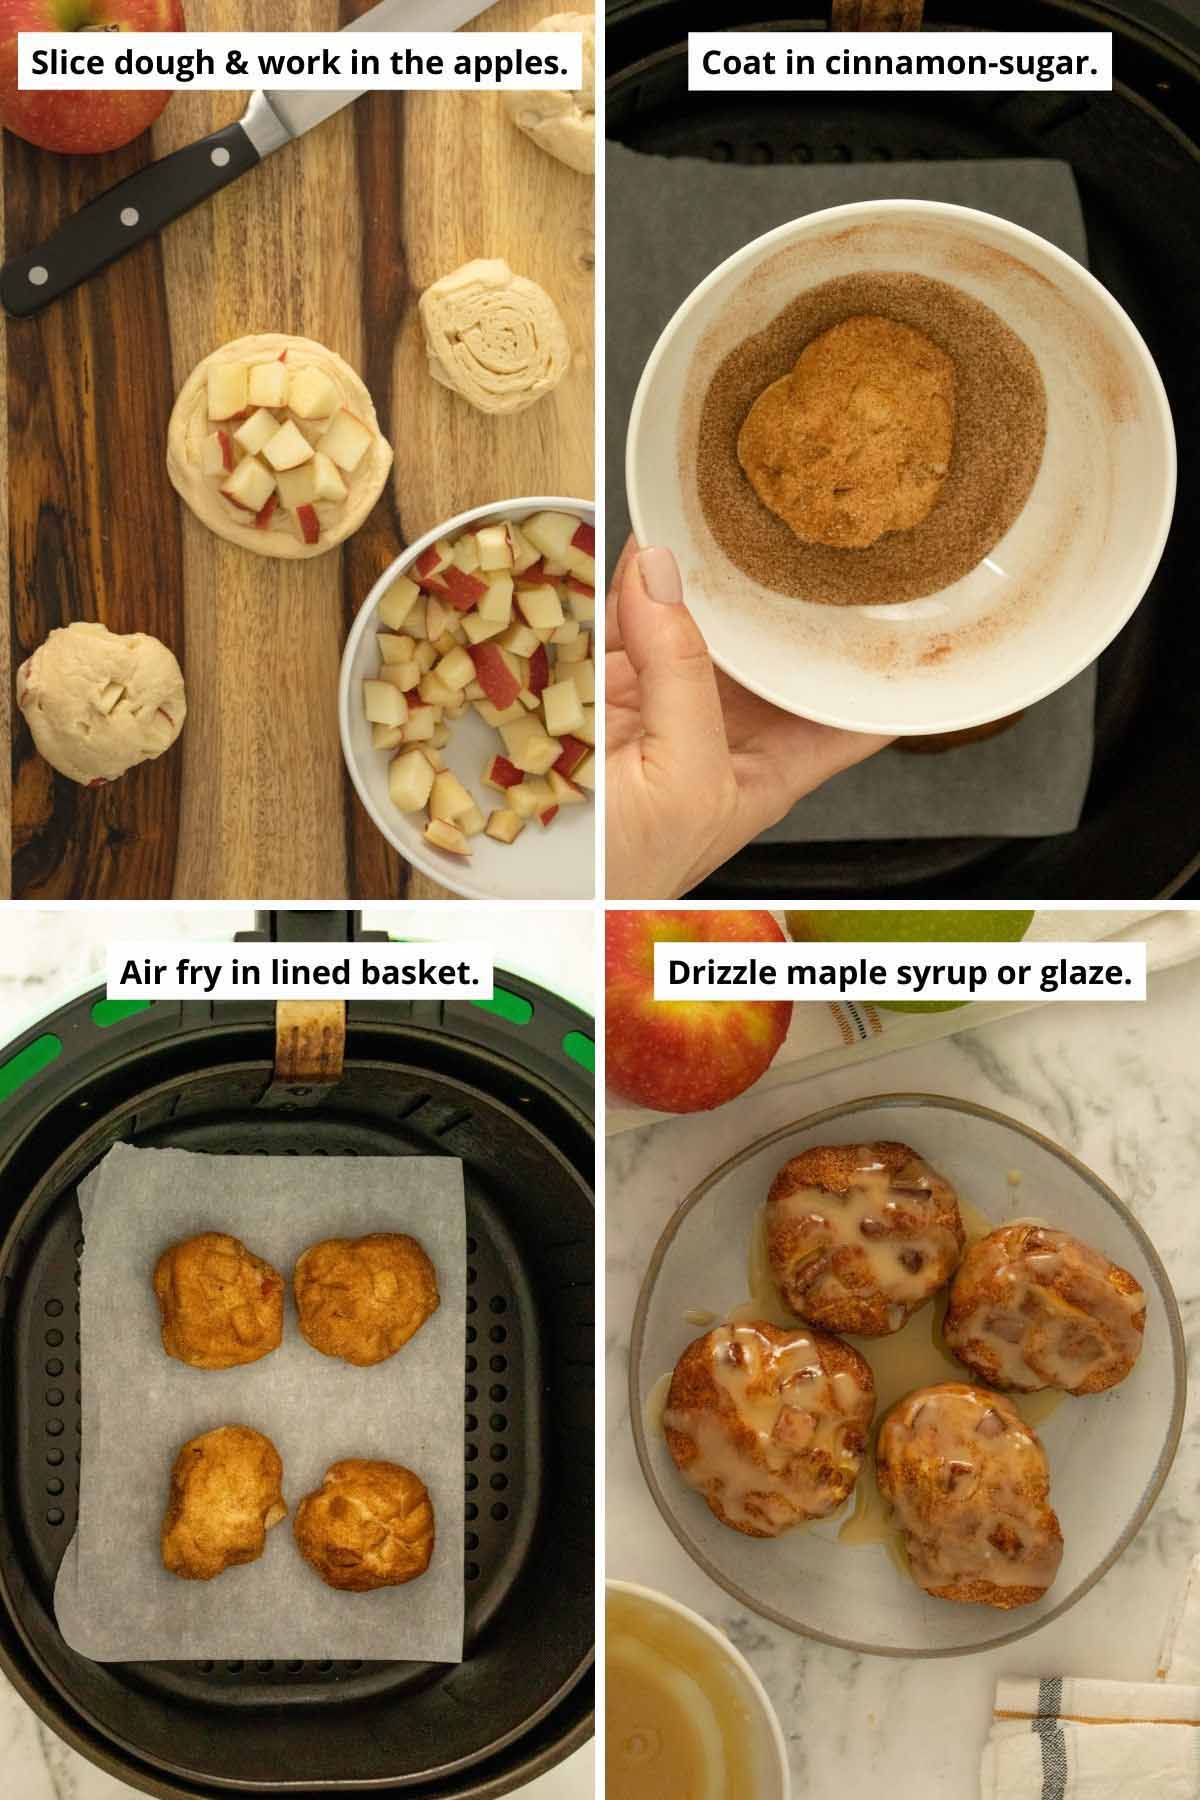 image collage showing making the fritters, coating in cinnamon-sugar, arranging in lined air fryer basket, and after glazing